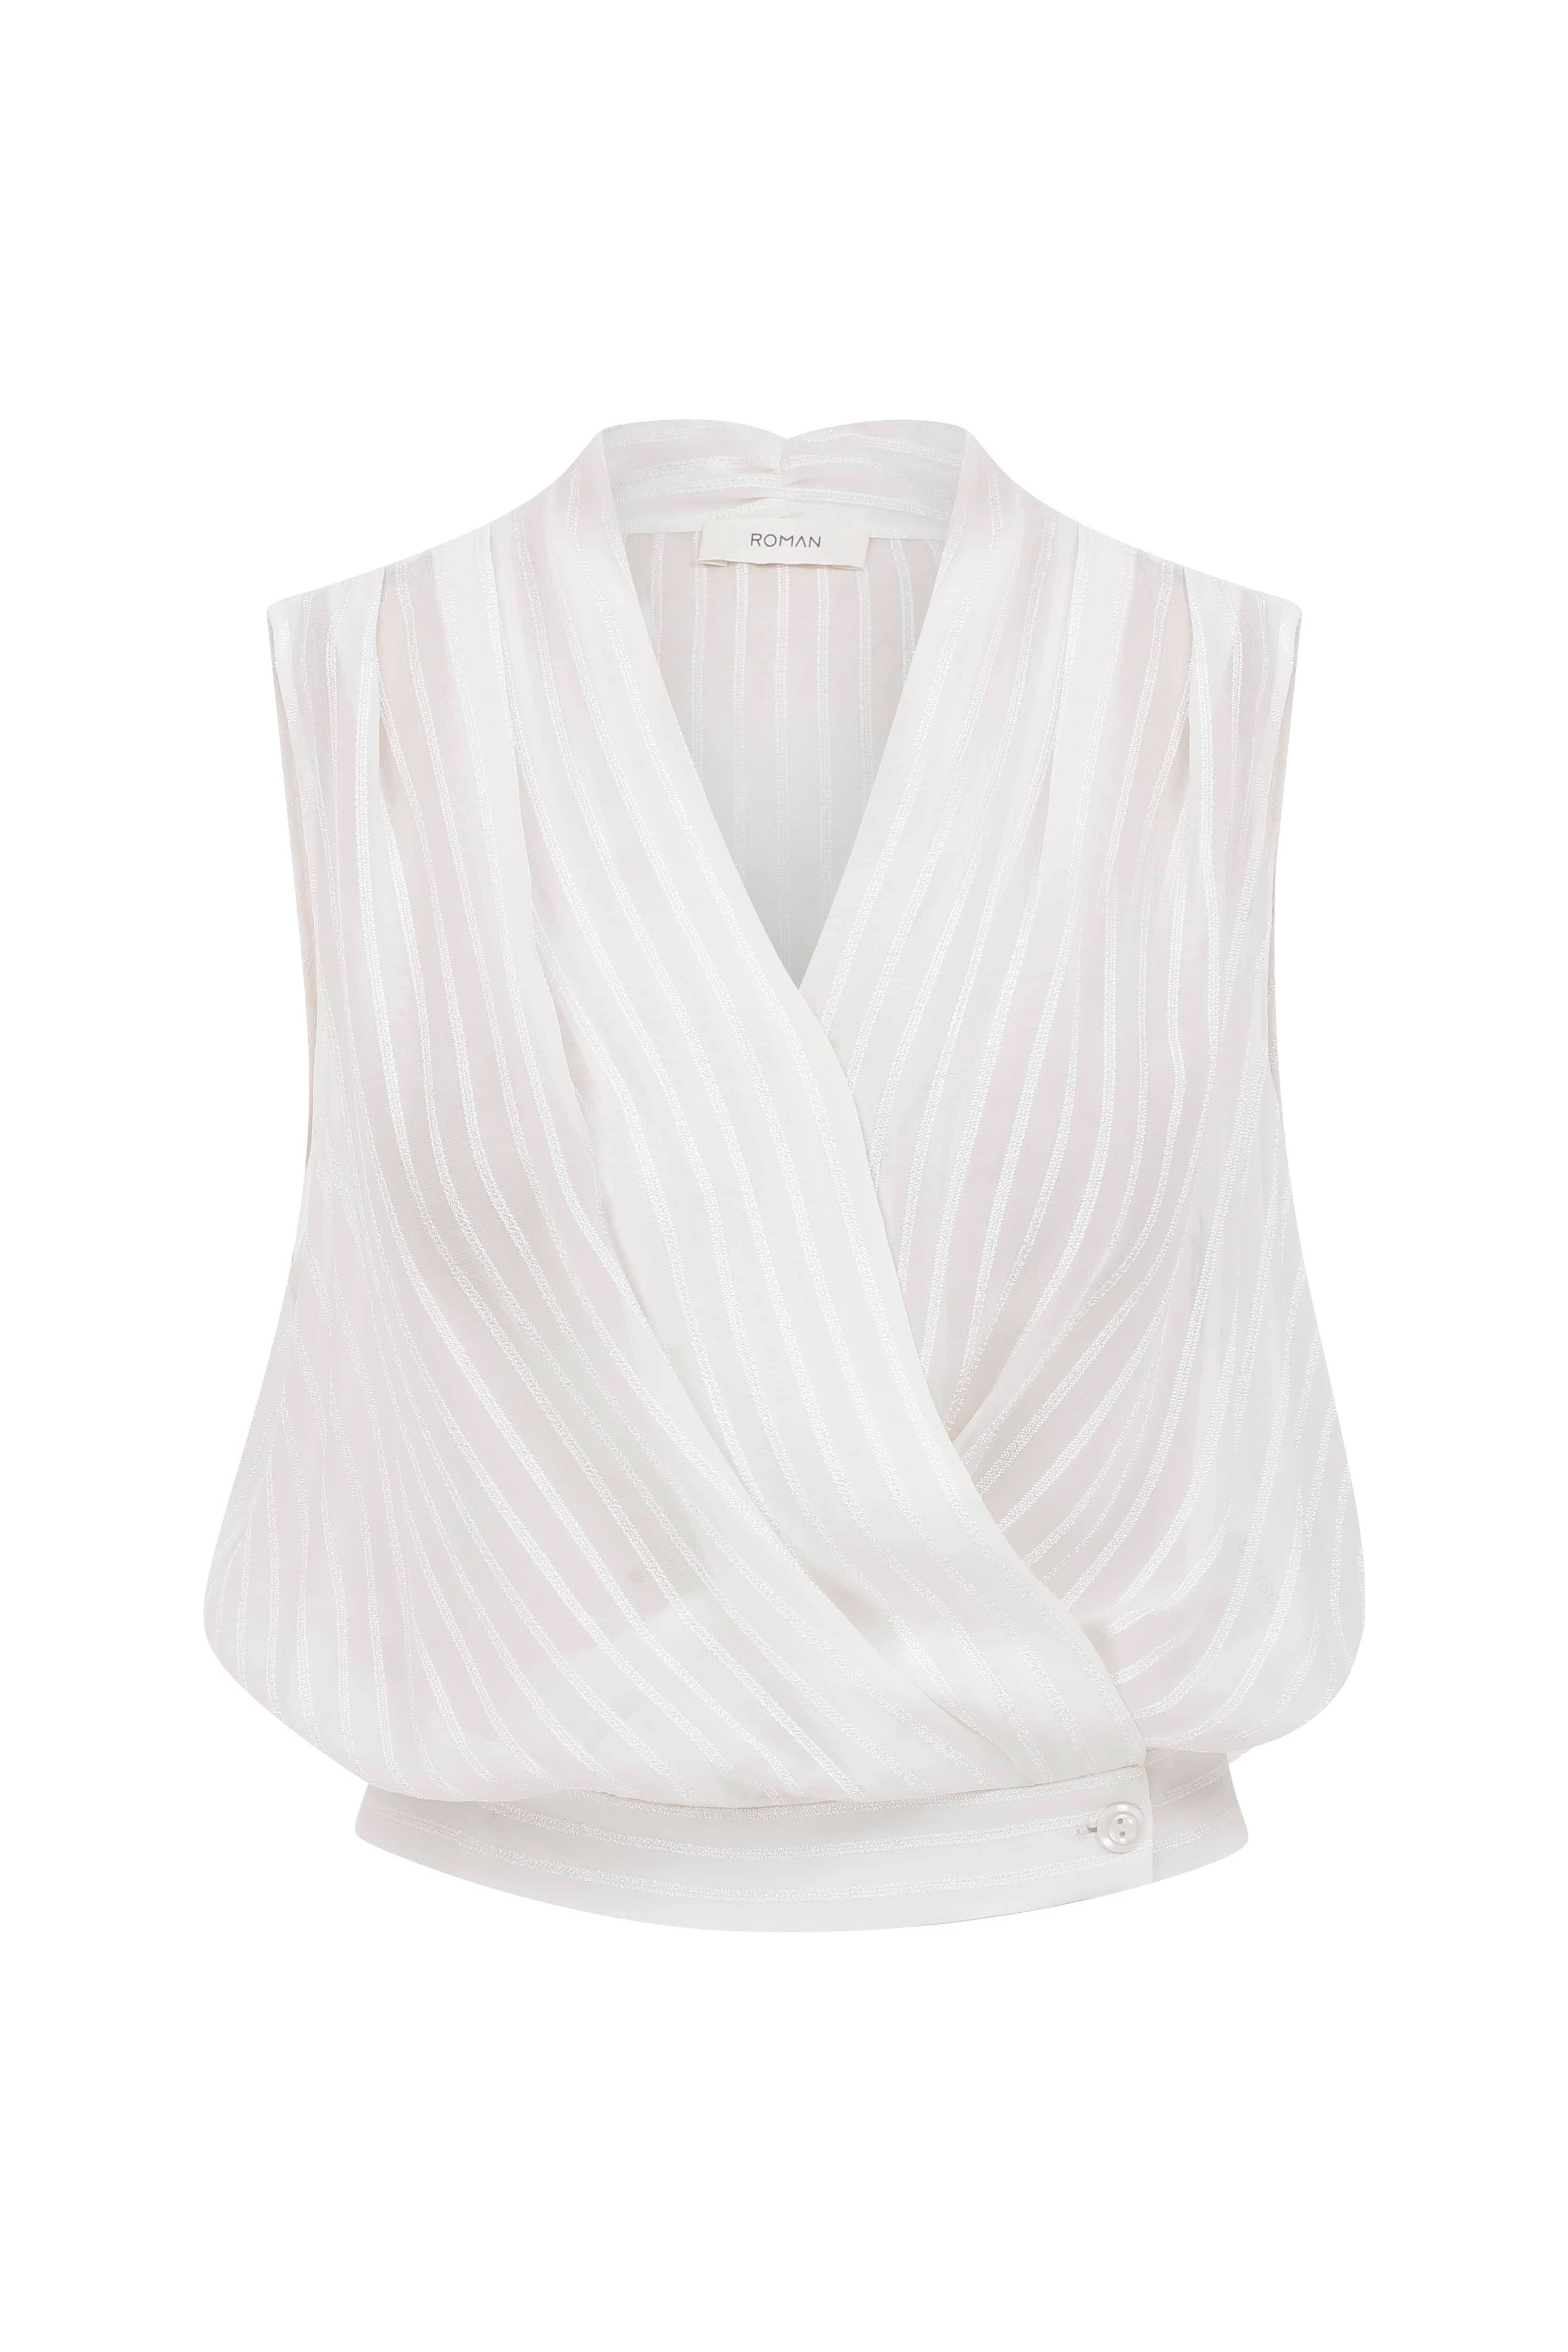 Roman Sheer Striped Double Breasted White Blouse. 2